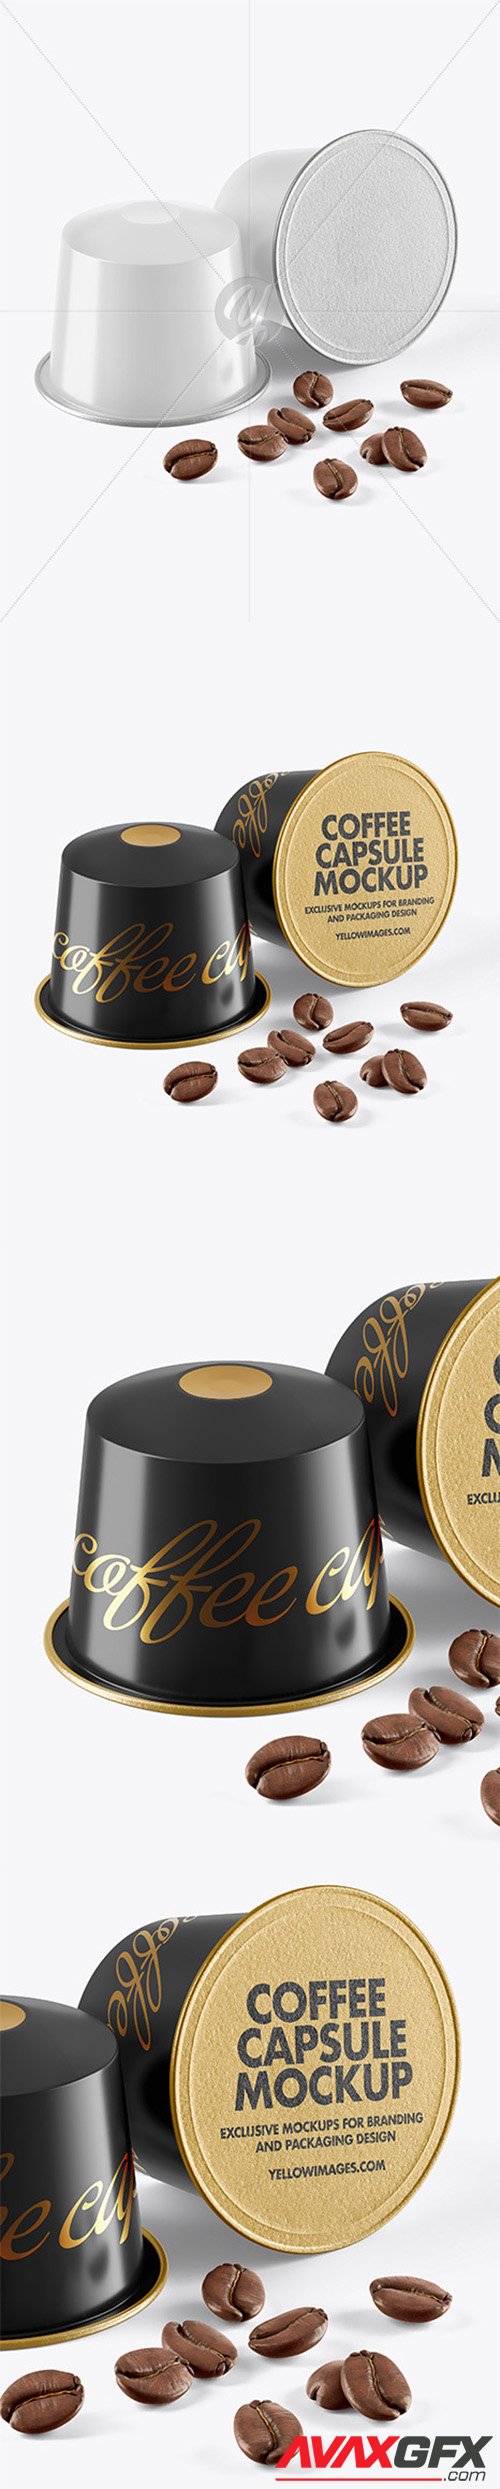 Two Coffee Capsules With Coffee Beans Mockup 59443 Avaxgfx All Downloads That You Need In One Place Graphic From Nitroflare Rapidgator